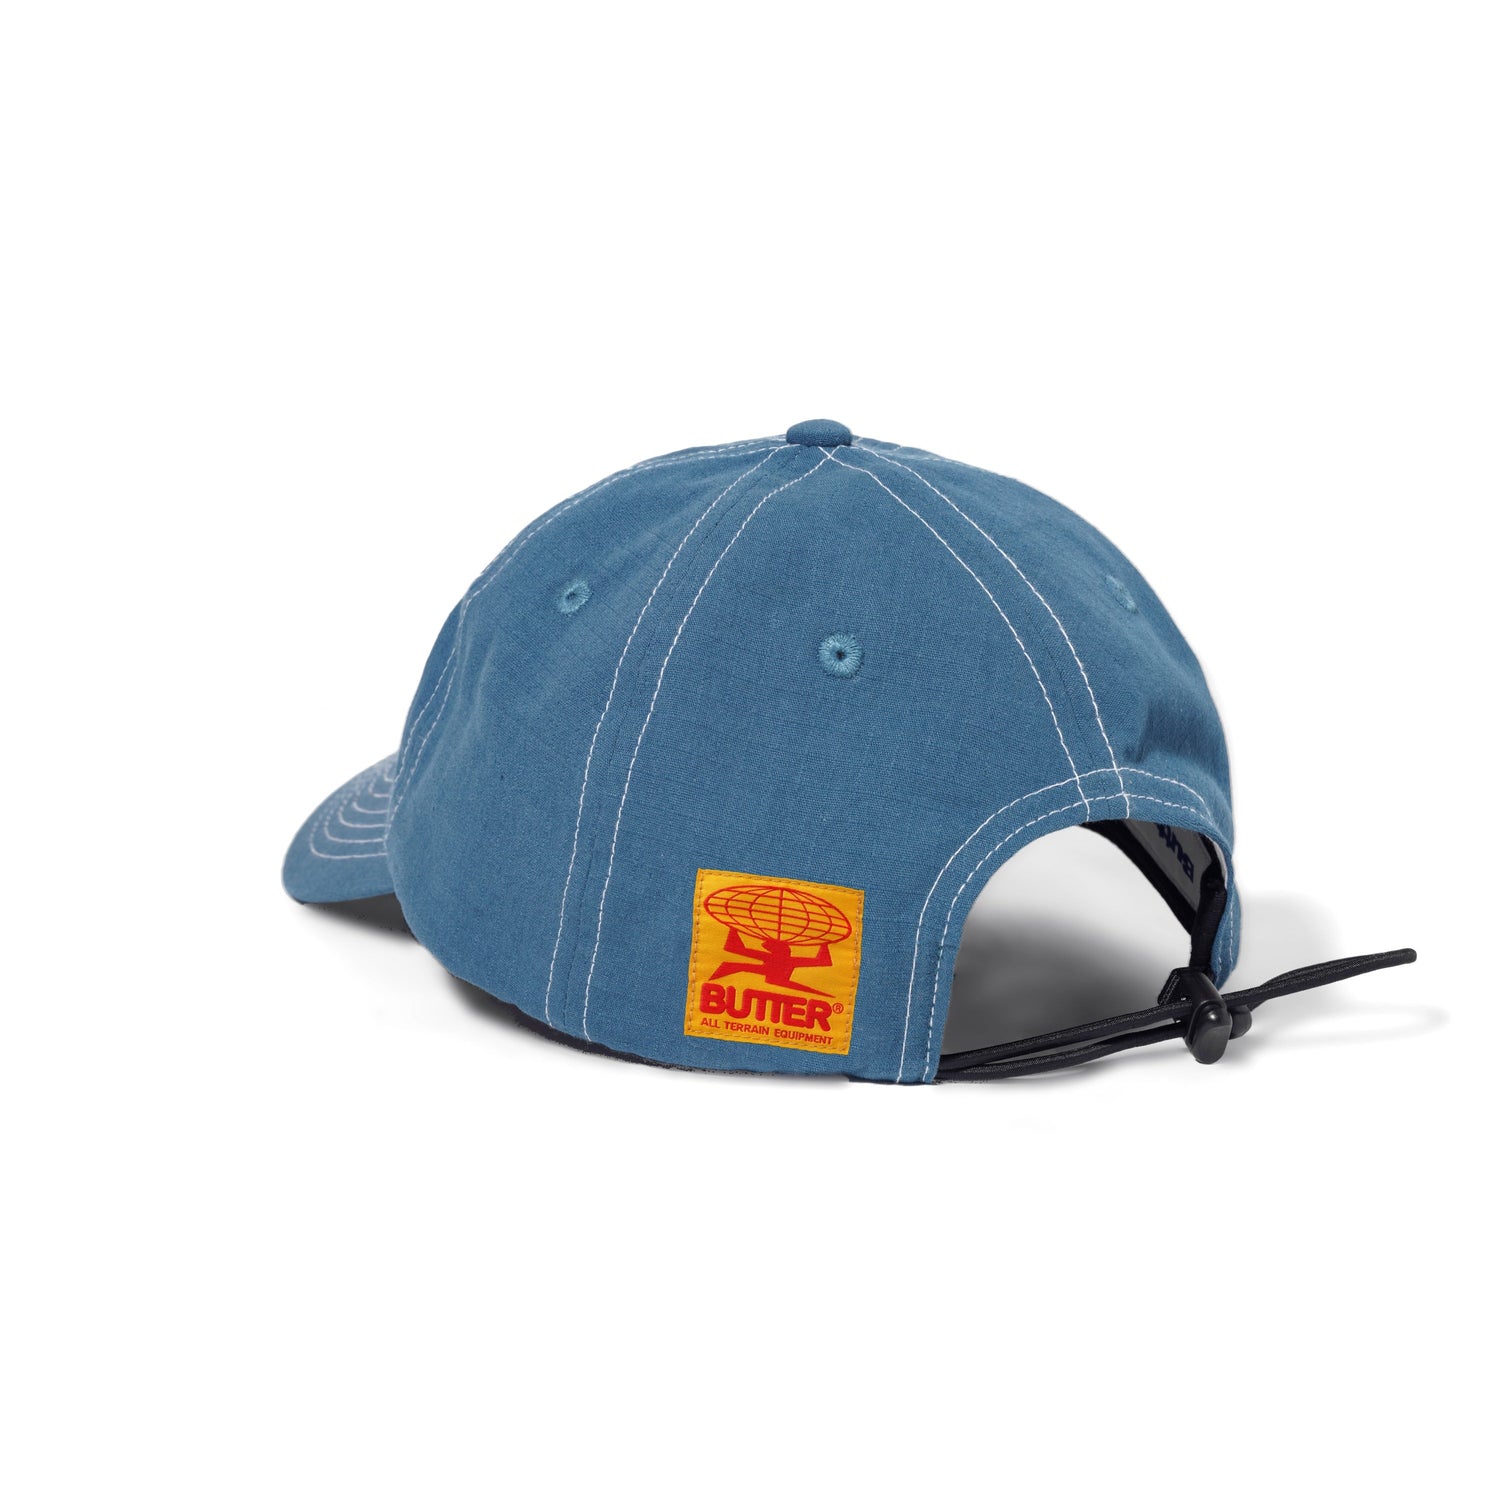 Washed Ripstop 6 Panel Cap, Navy